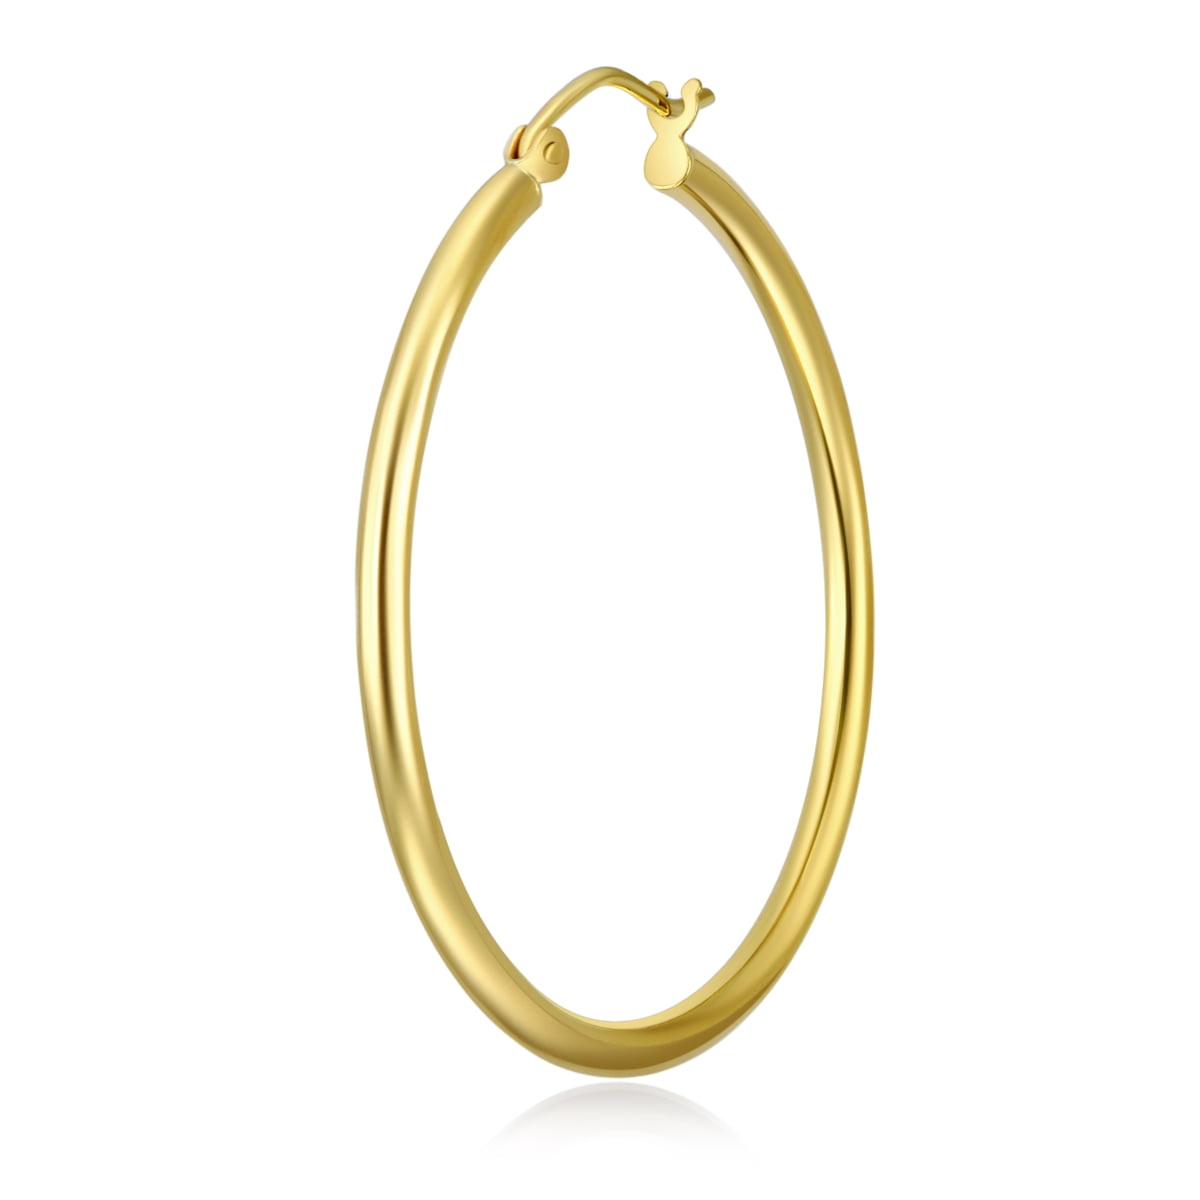 10 Different Size Available Wellingsale Ladies 14k Yellow Gold Polished 2mm Hinged Classic Hoop Earrings